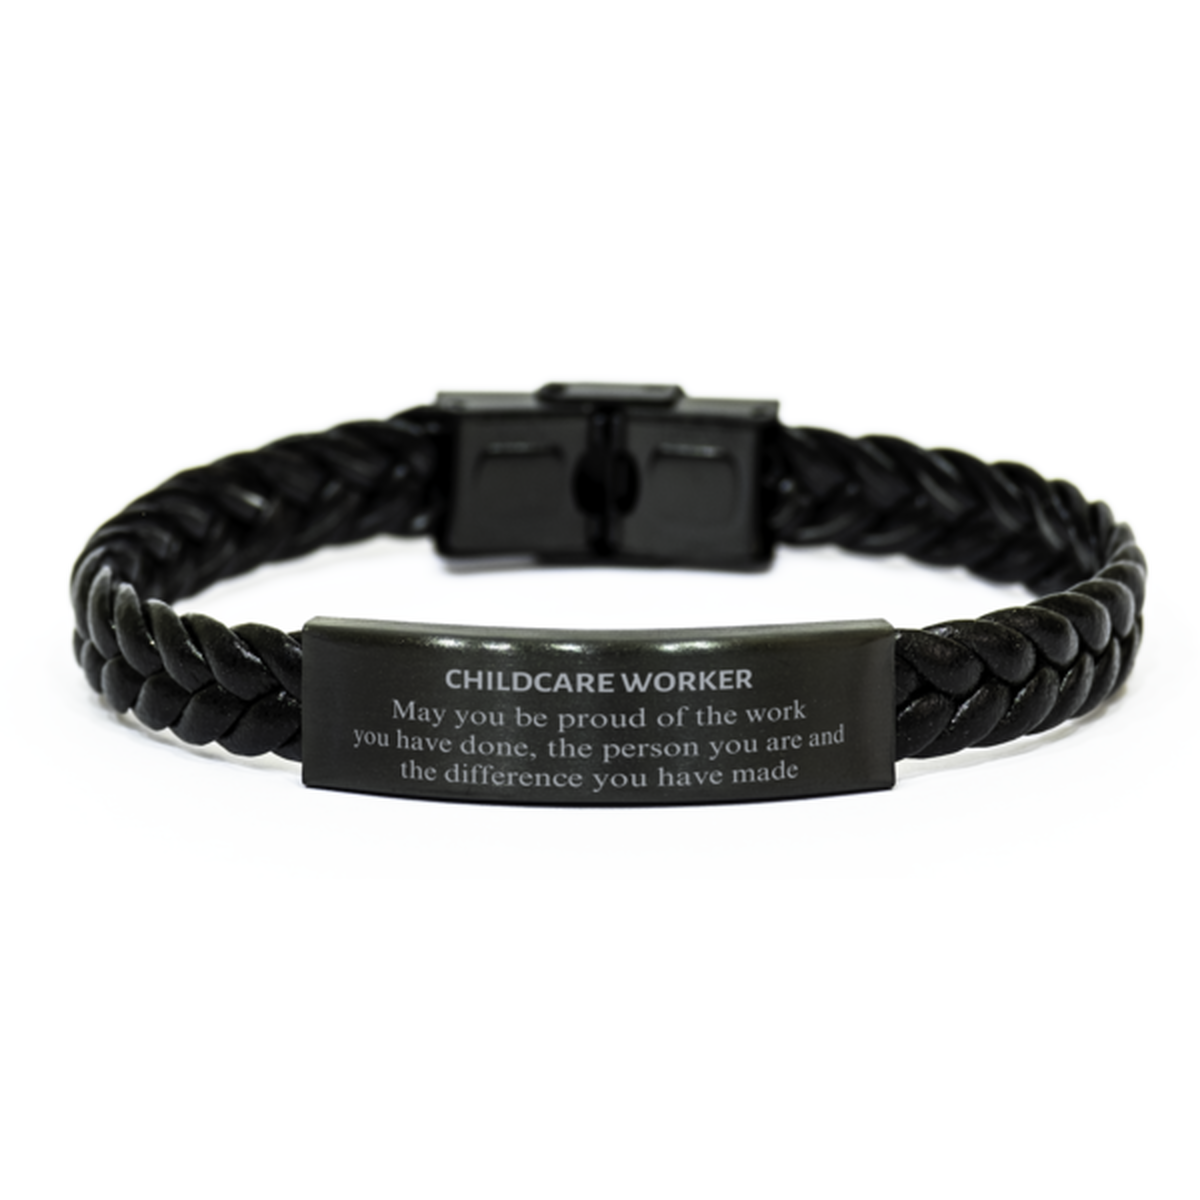 Childcare Worker May you be proud of the work you have done, Retirement Childcare Worker Braided Leather Bracelet for Colleague Appreciation Gifts Amazing for Childcare Worker